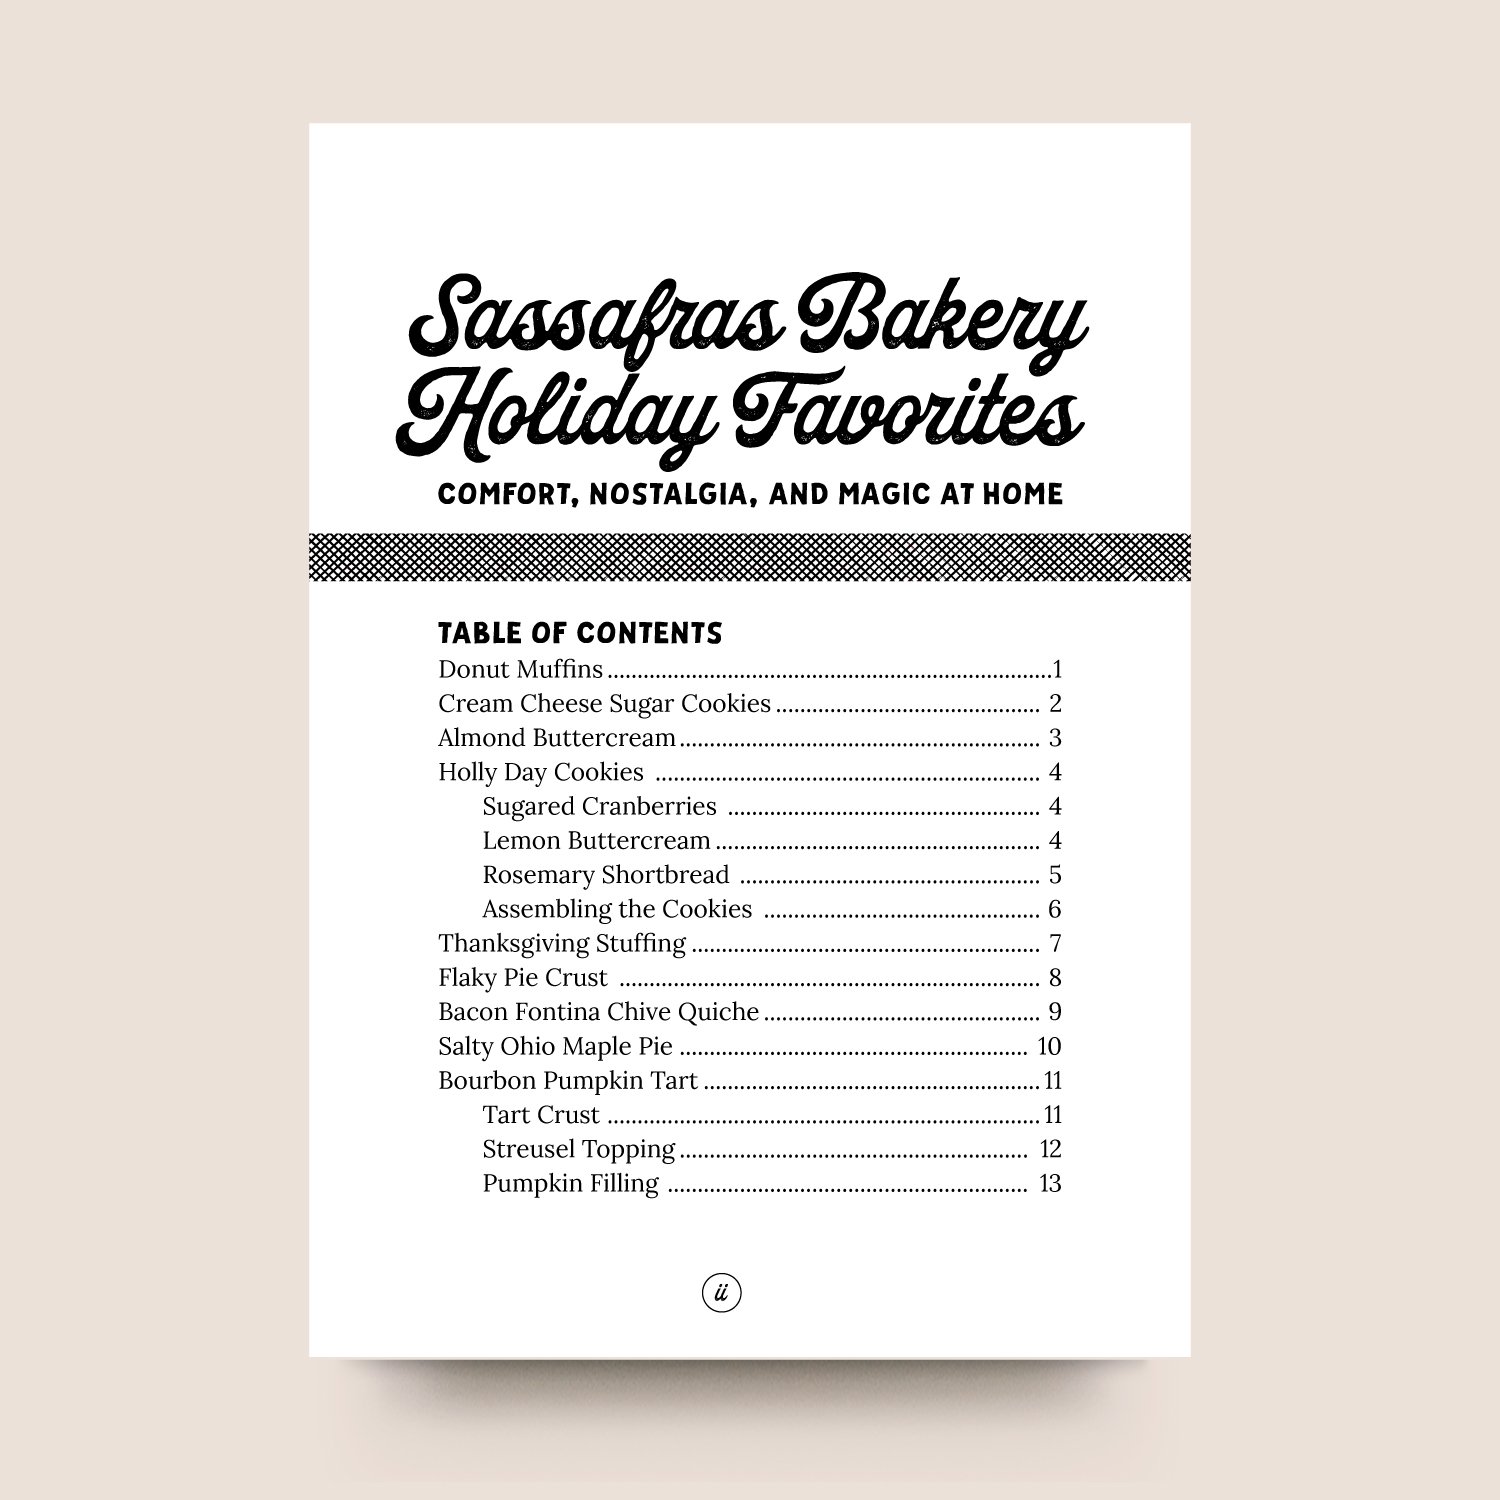 SB_Holiday-Booklet-Contents_Mock-Up.jpg